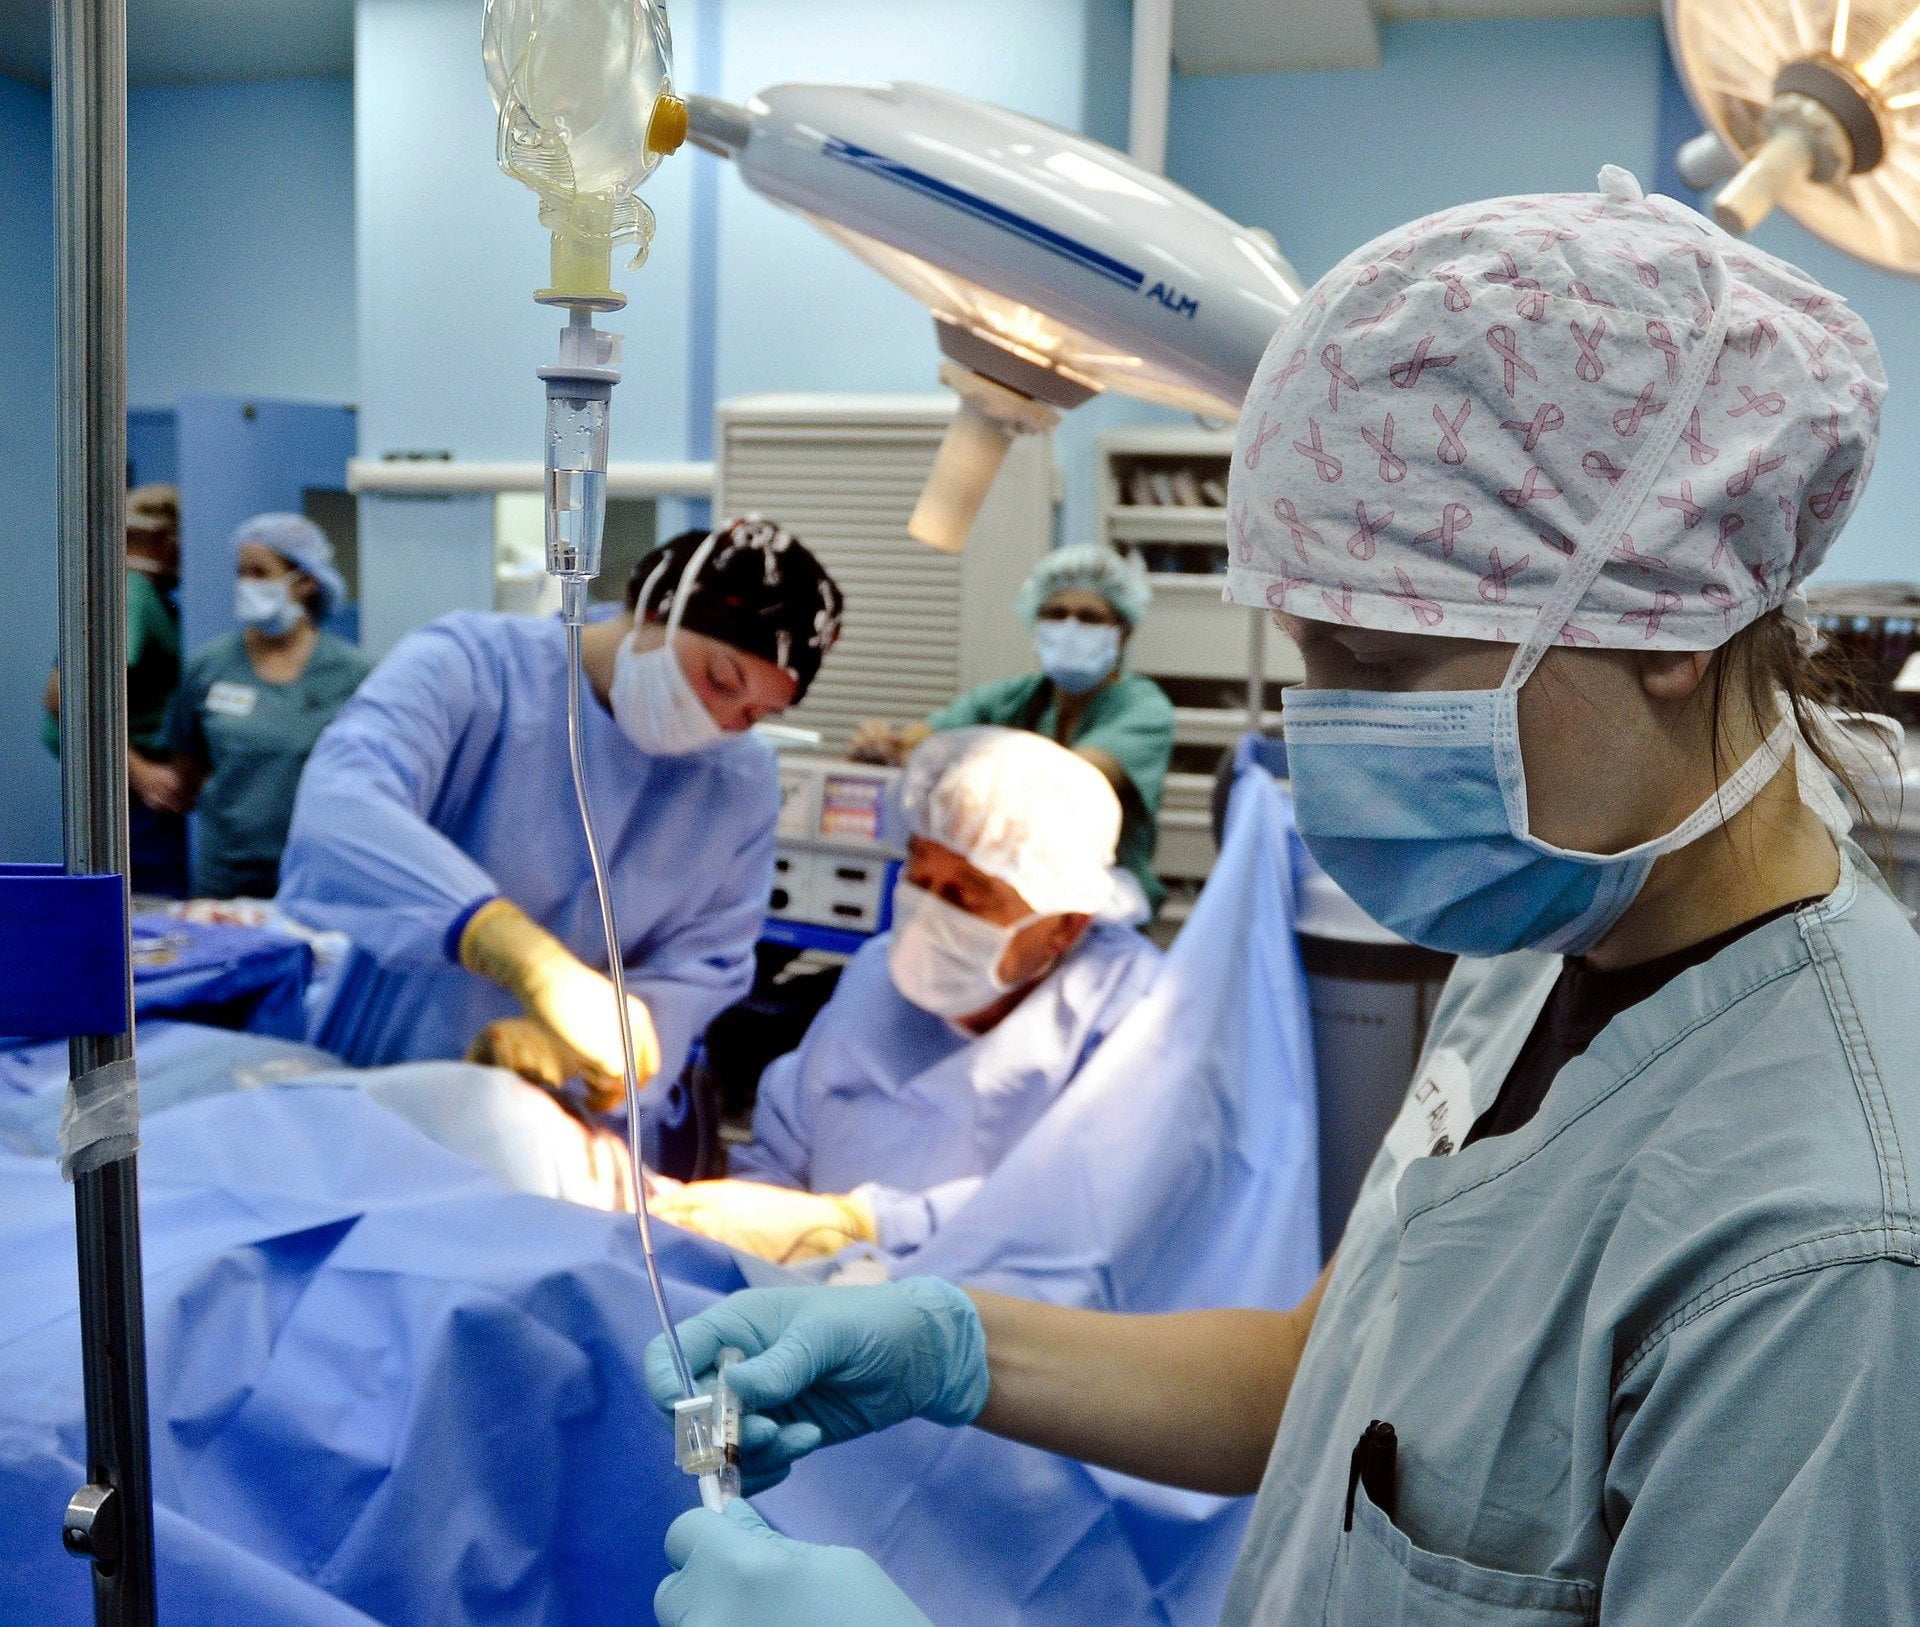 Health care provider, Medical equipment, Operating theater, Scrubs, Blue, Surgeon